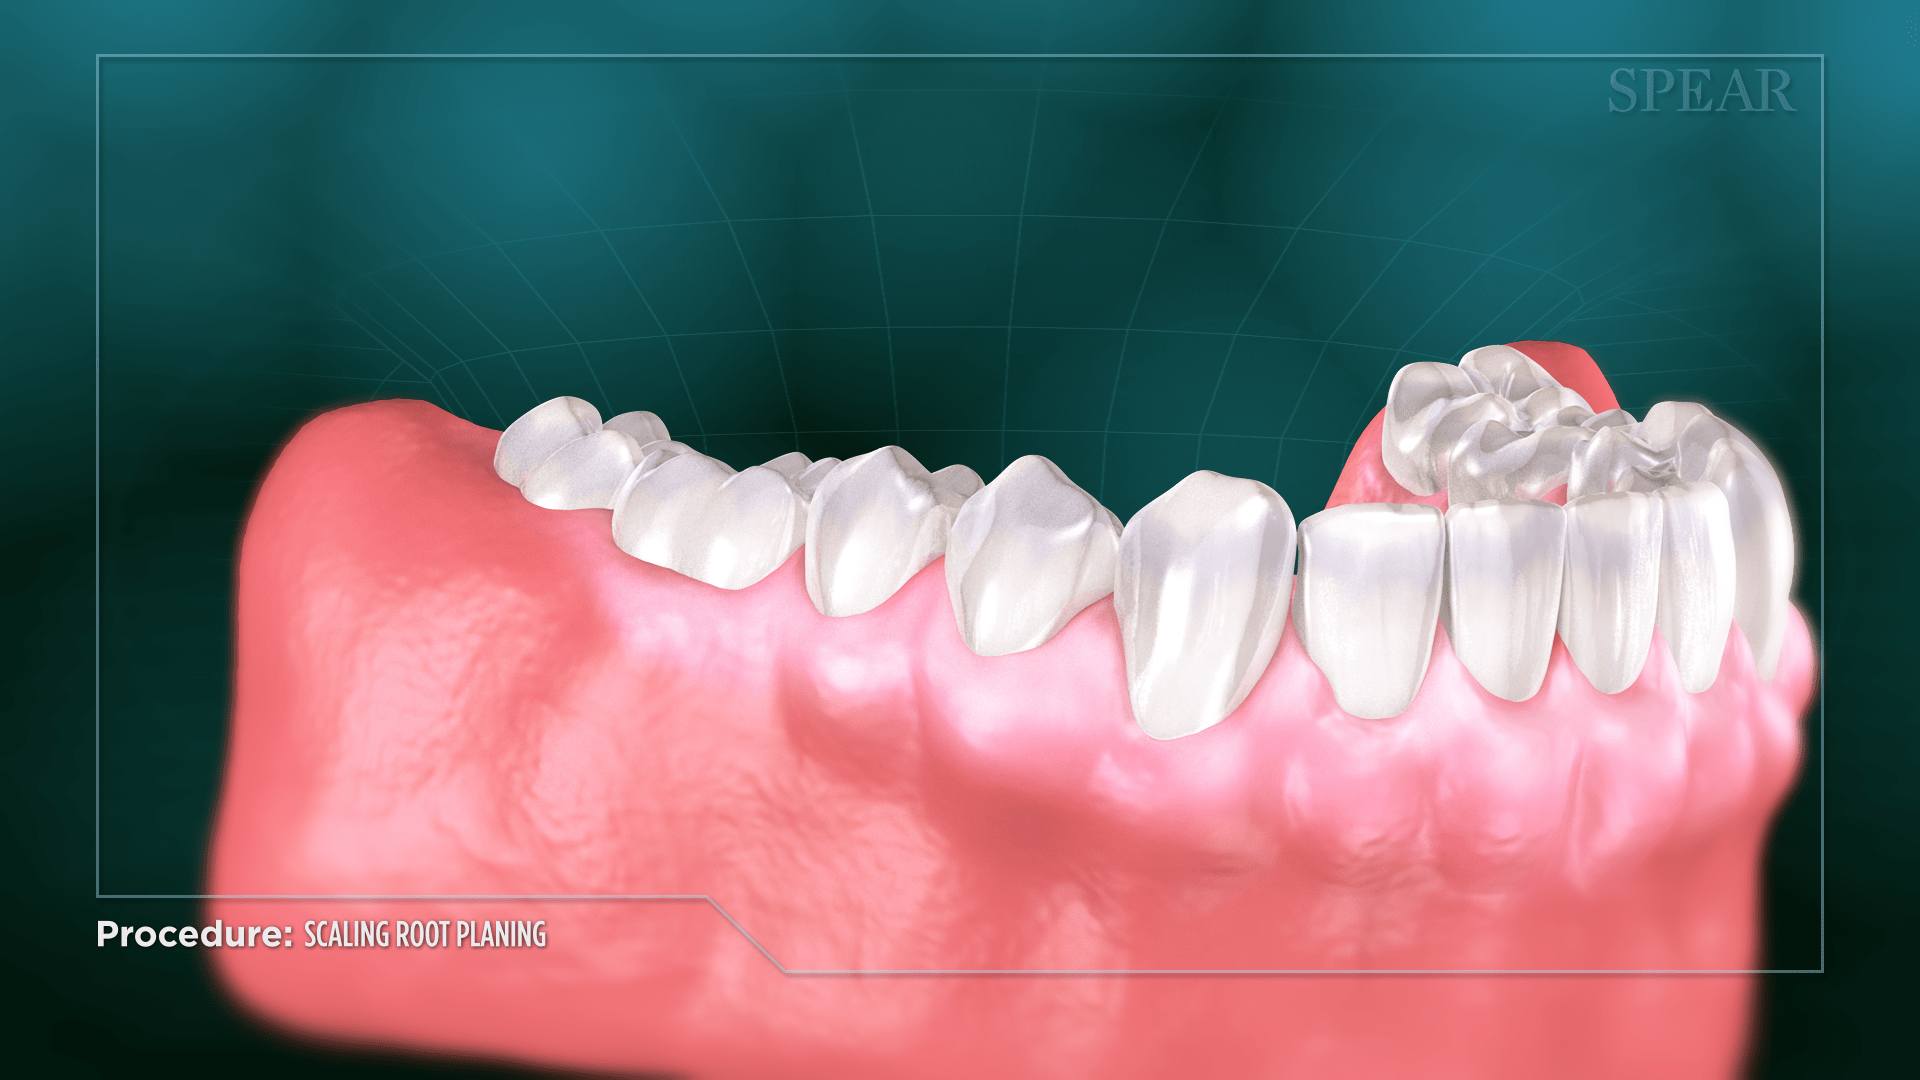 Periodontitis and Bone Loss Prevention at Lifetime Dentistry